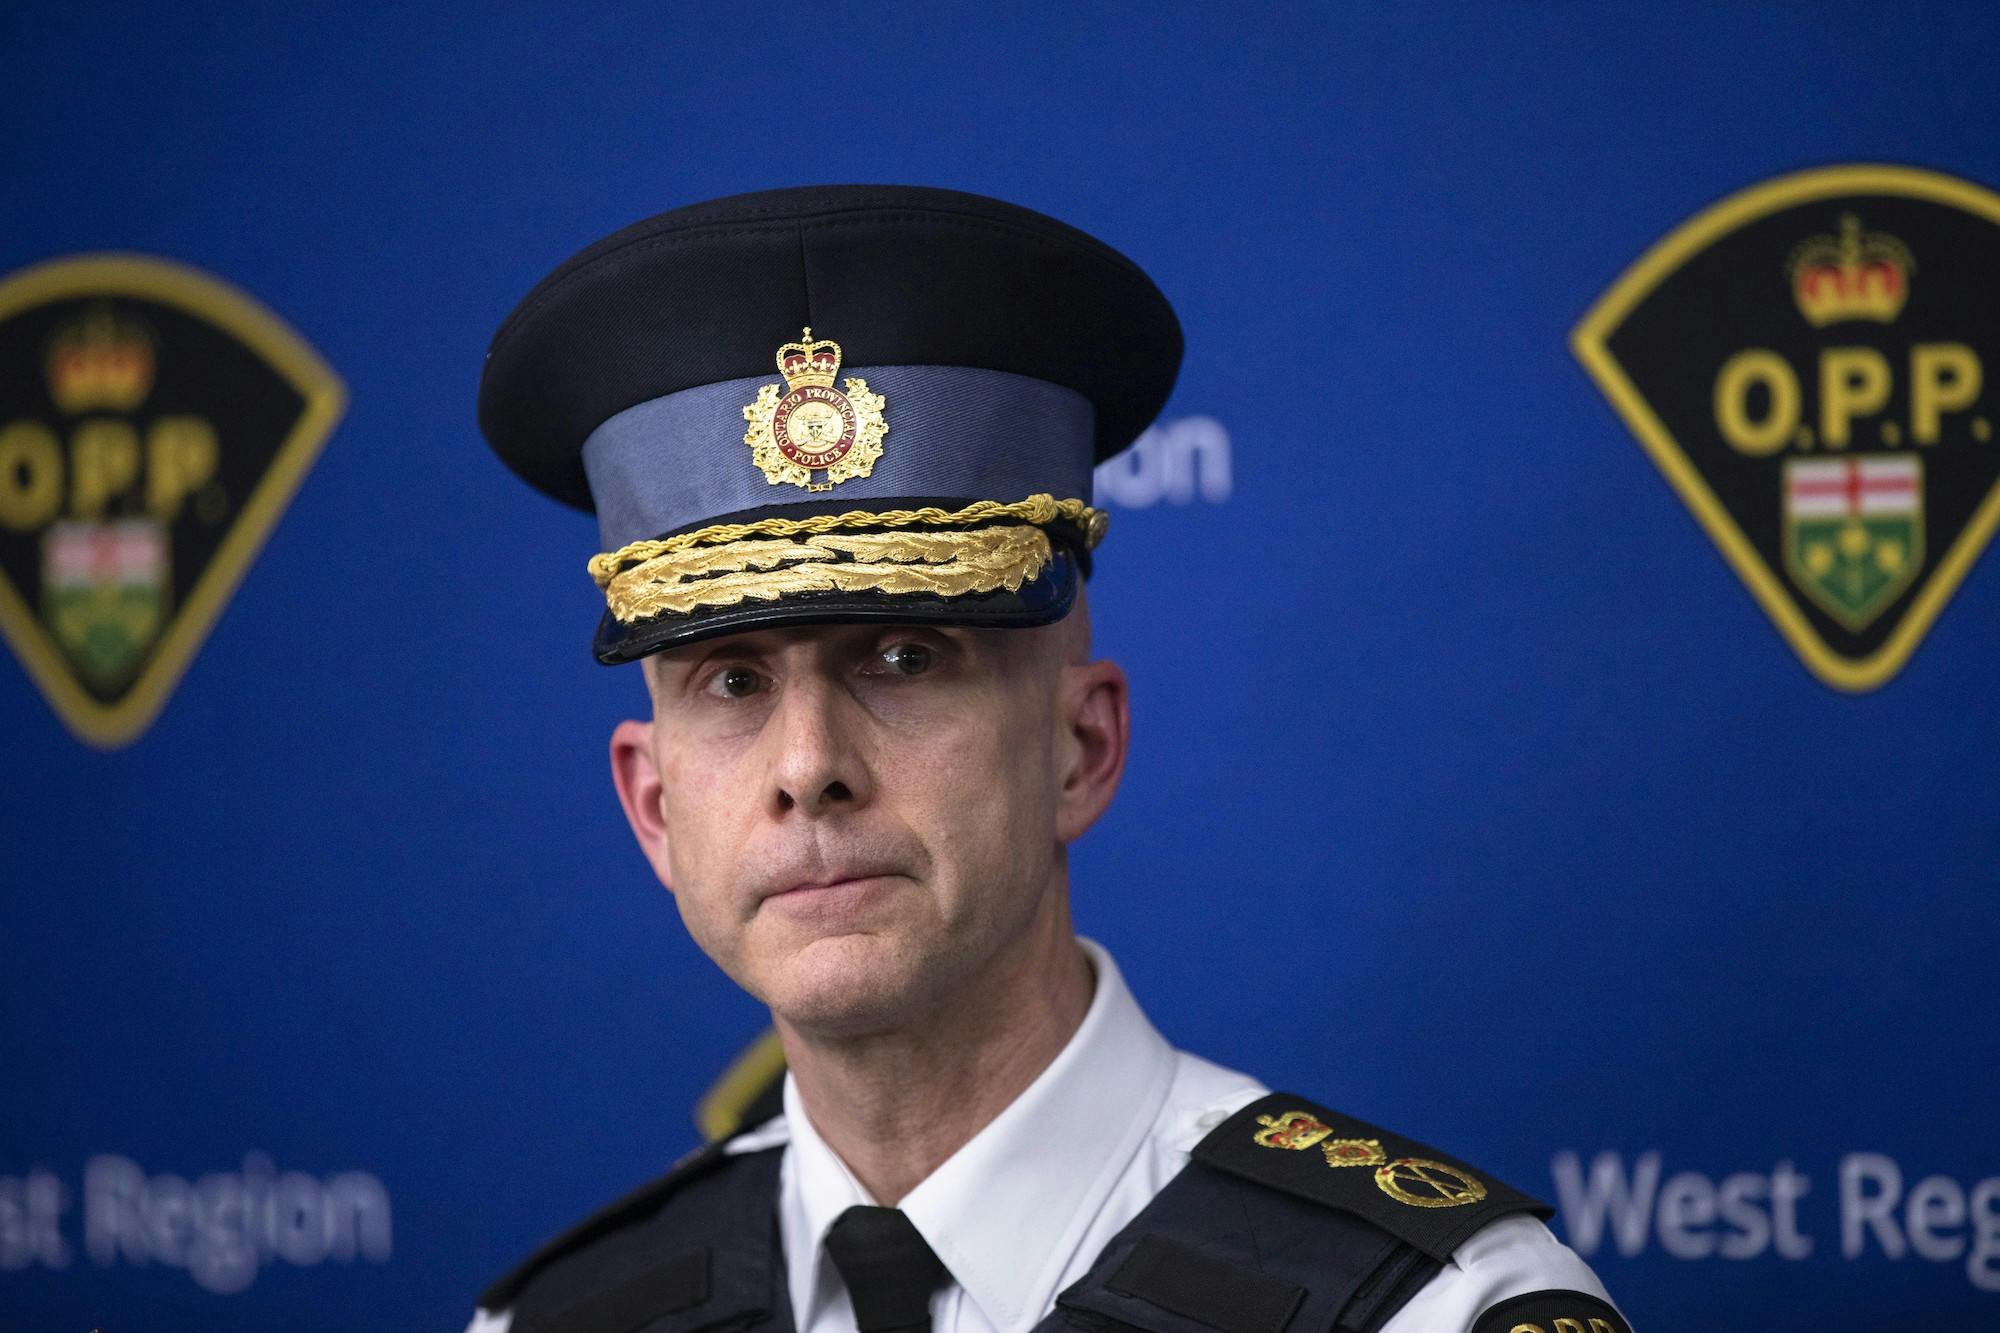 Premier vows at OPP officer’s funeral to ‘do whatever it takes’ to protect police